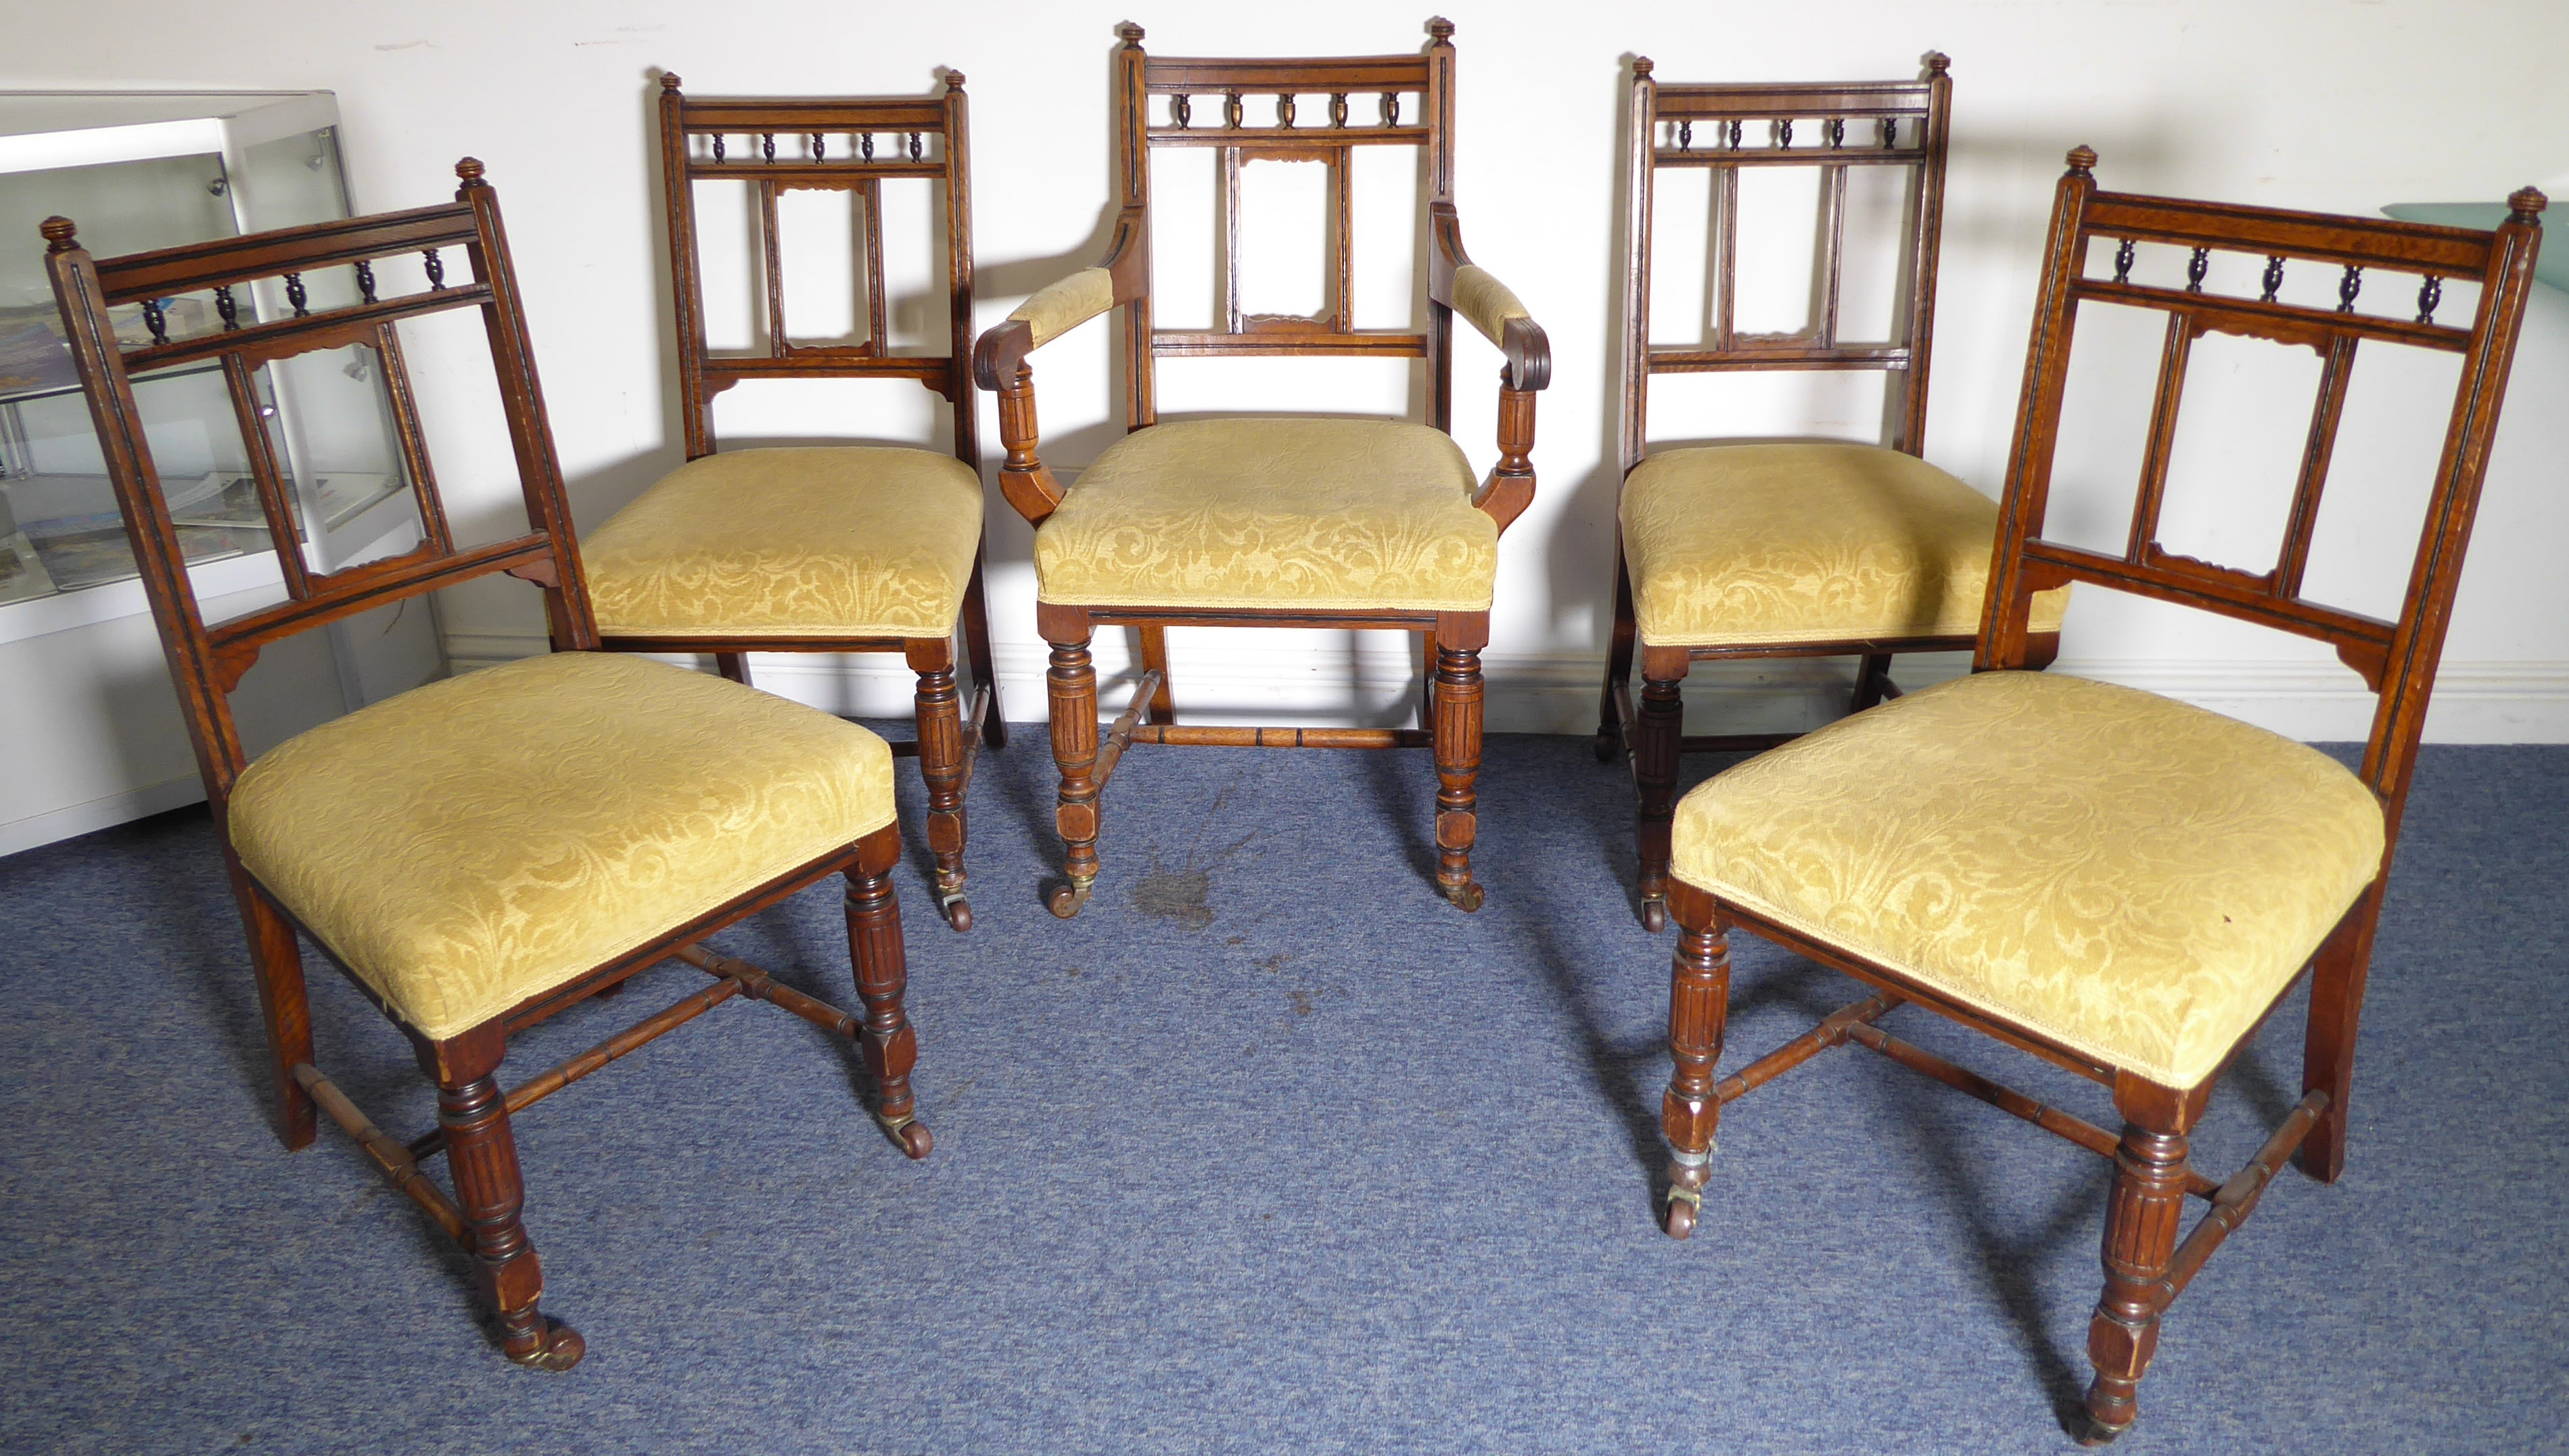 A set of five (4 + 1) late 19th century solid oak and ebonised dining chairs in the Aesthetic